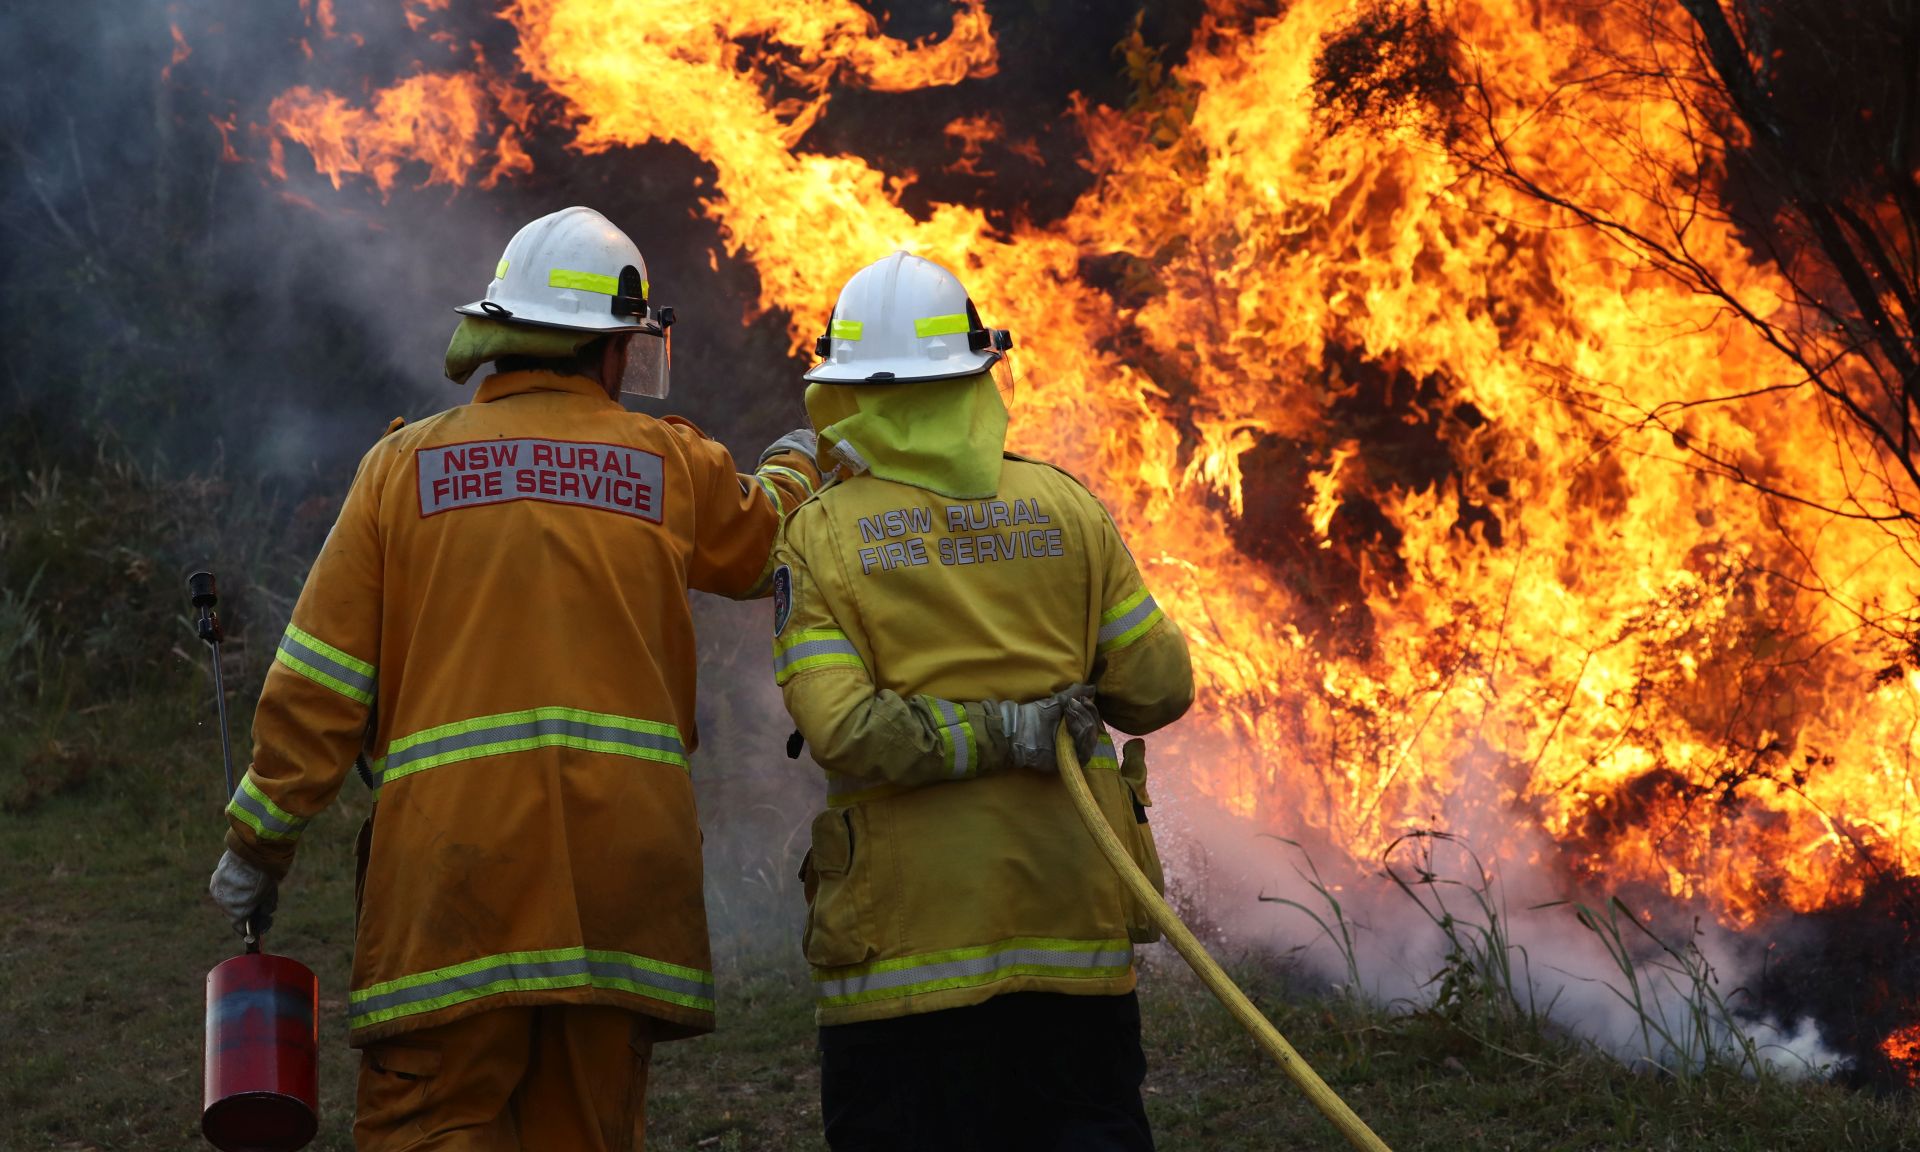 epa07831441 Firefighters work to contain a bushfire in Angourie, New South Wales, Australia, 10 September 2019. According to reports, nearly 400 firefighters have been deployed in New South Wales, with another 400 expected to be deployed on 10 September in an effort to bring more than a dozen fires under control.  EPA/JASON O'BRIEN  AUSTRALIA AND NEW ZEALAND OUT